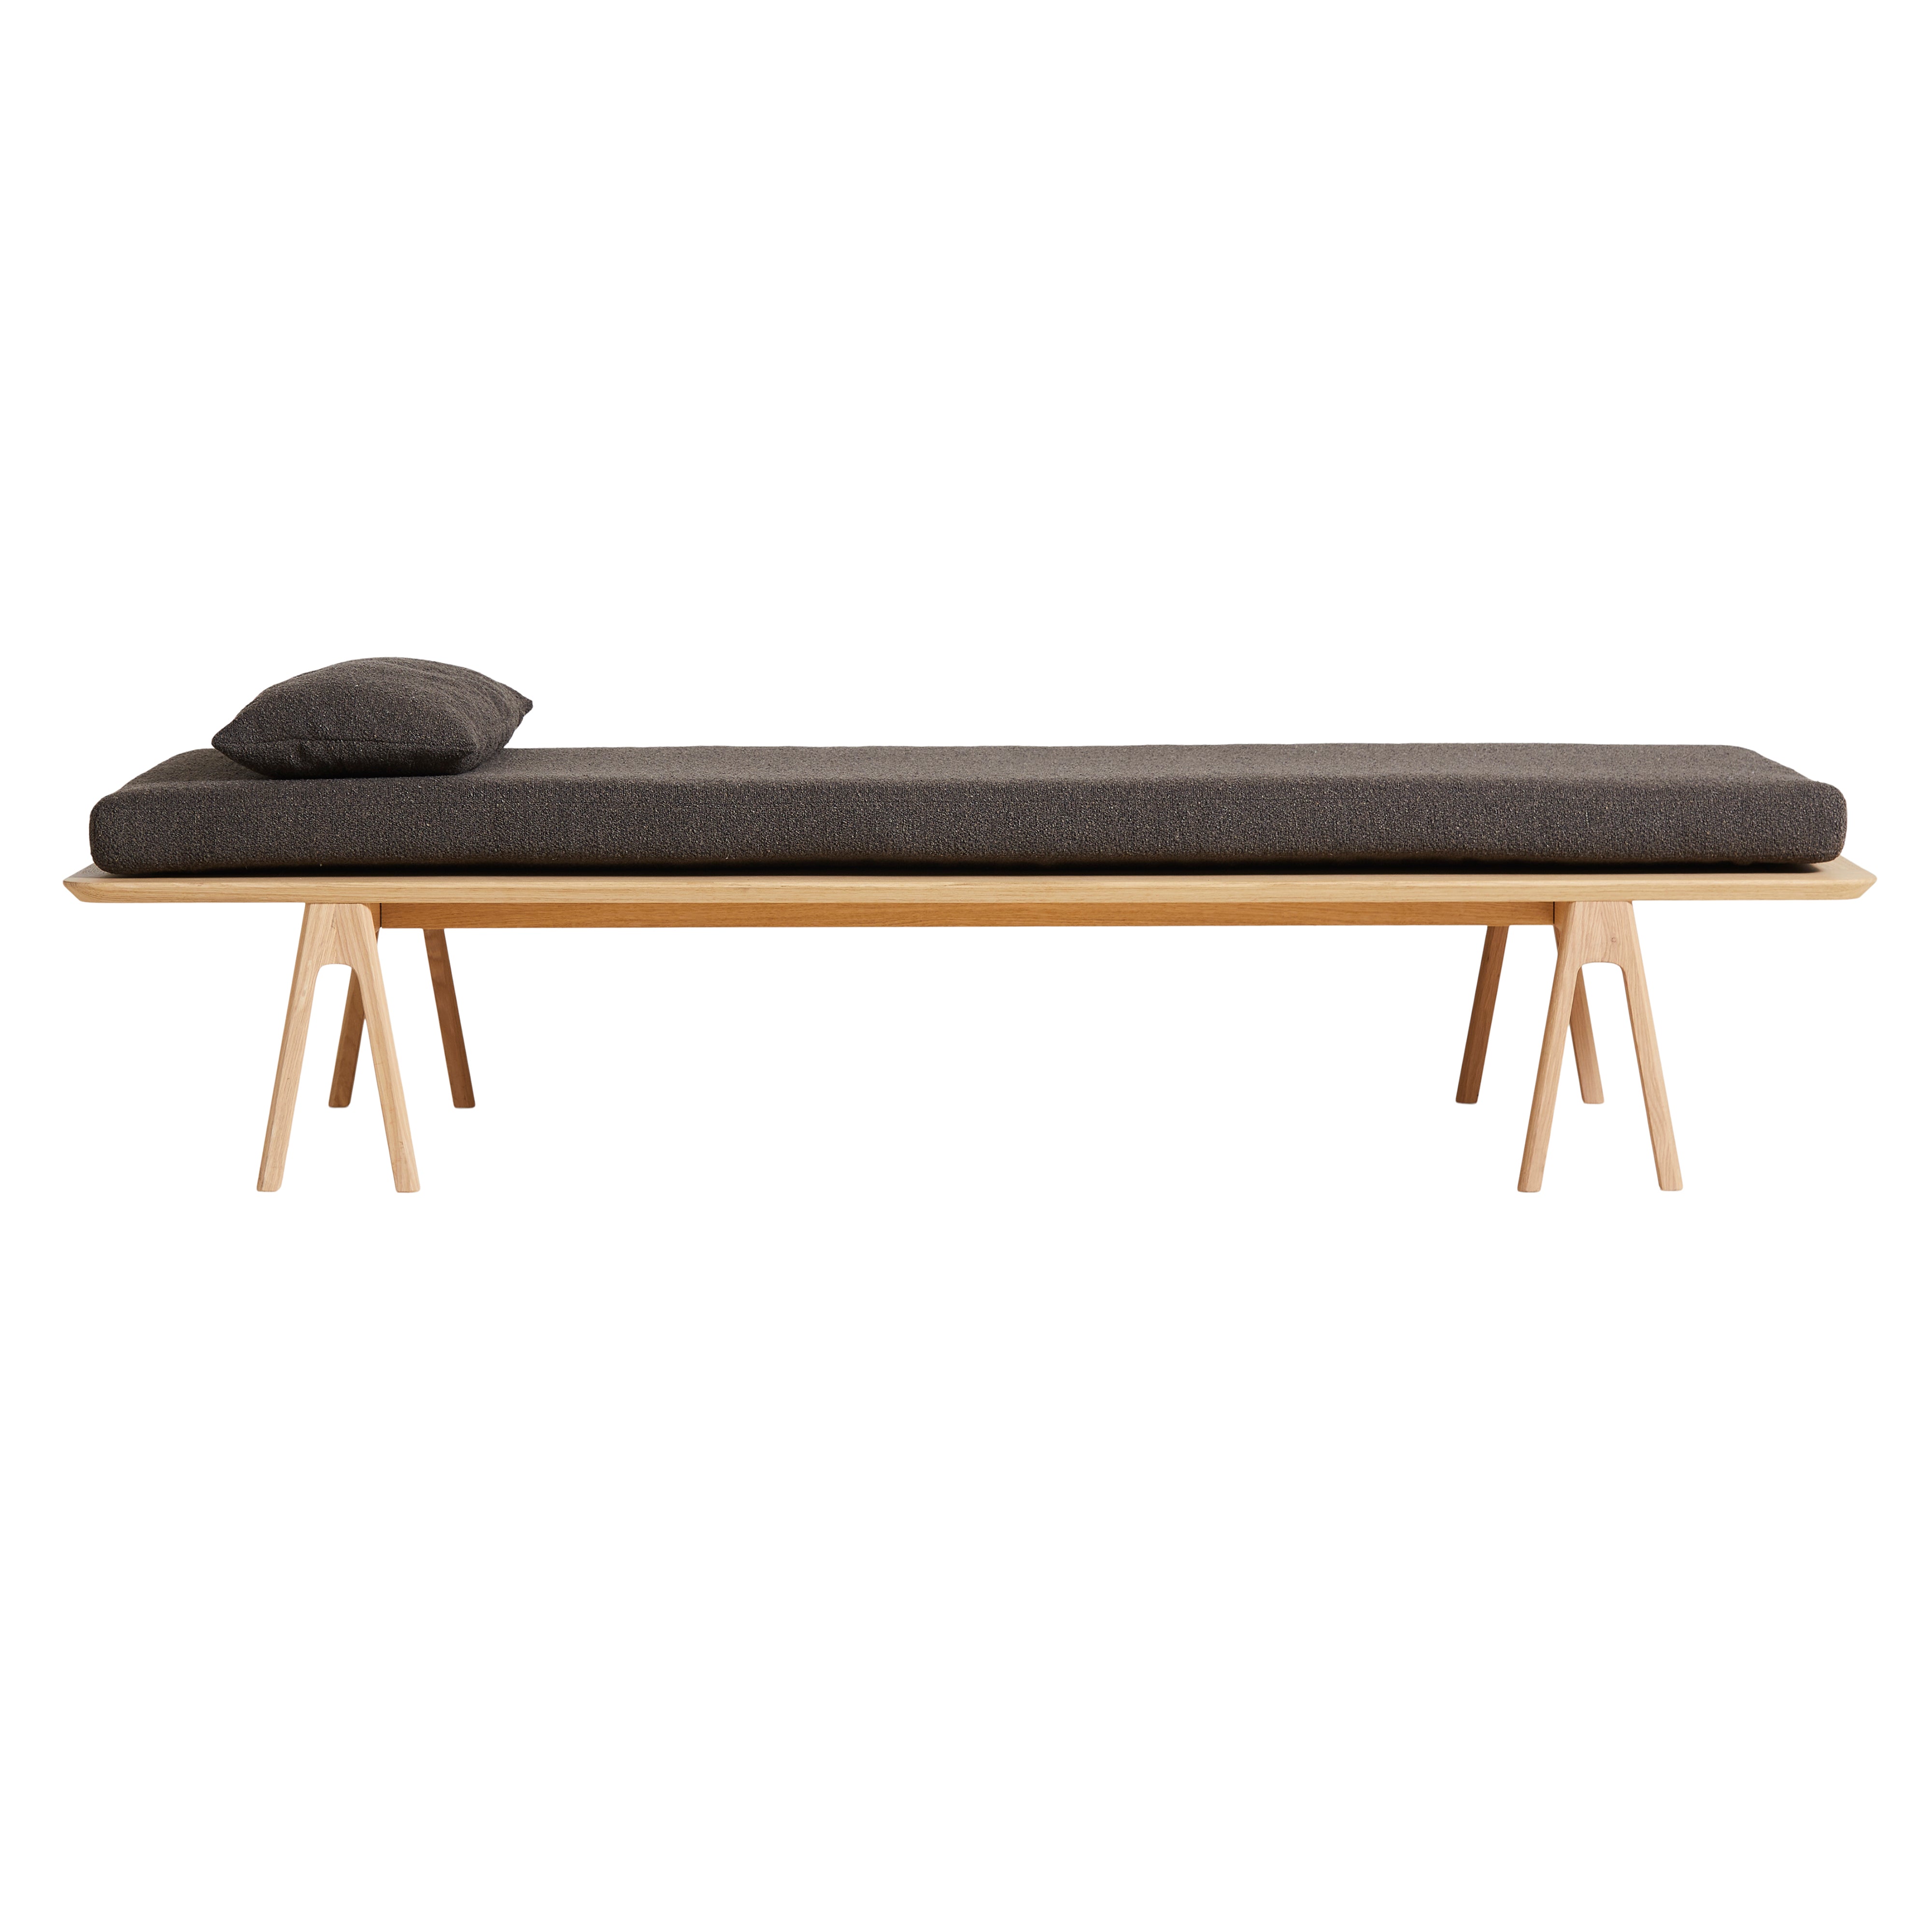 Level Daybed: White Pigmented Oak + With Darkbrown Pillow + Alpine 18